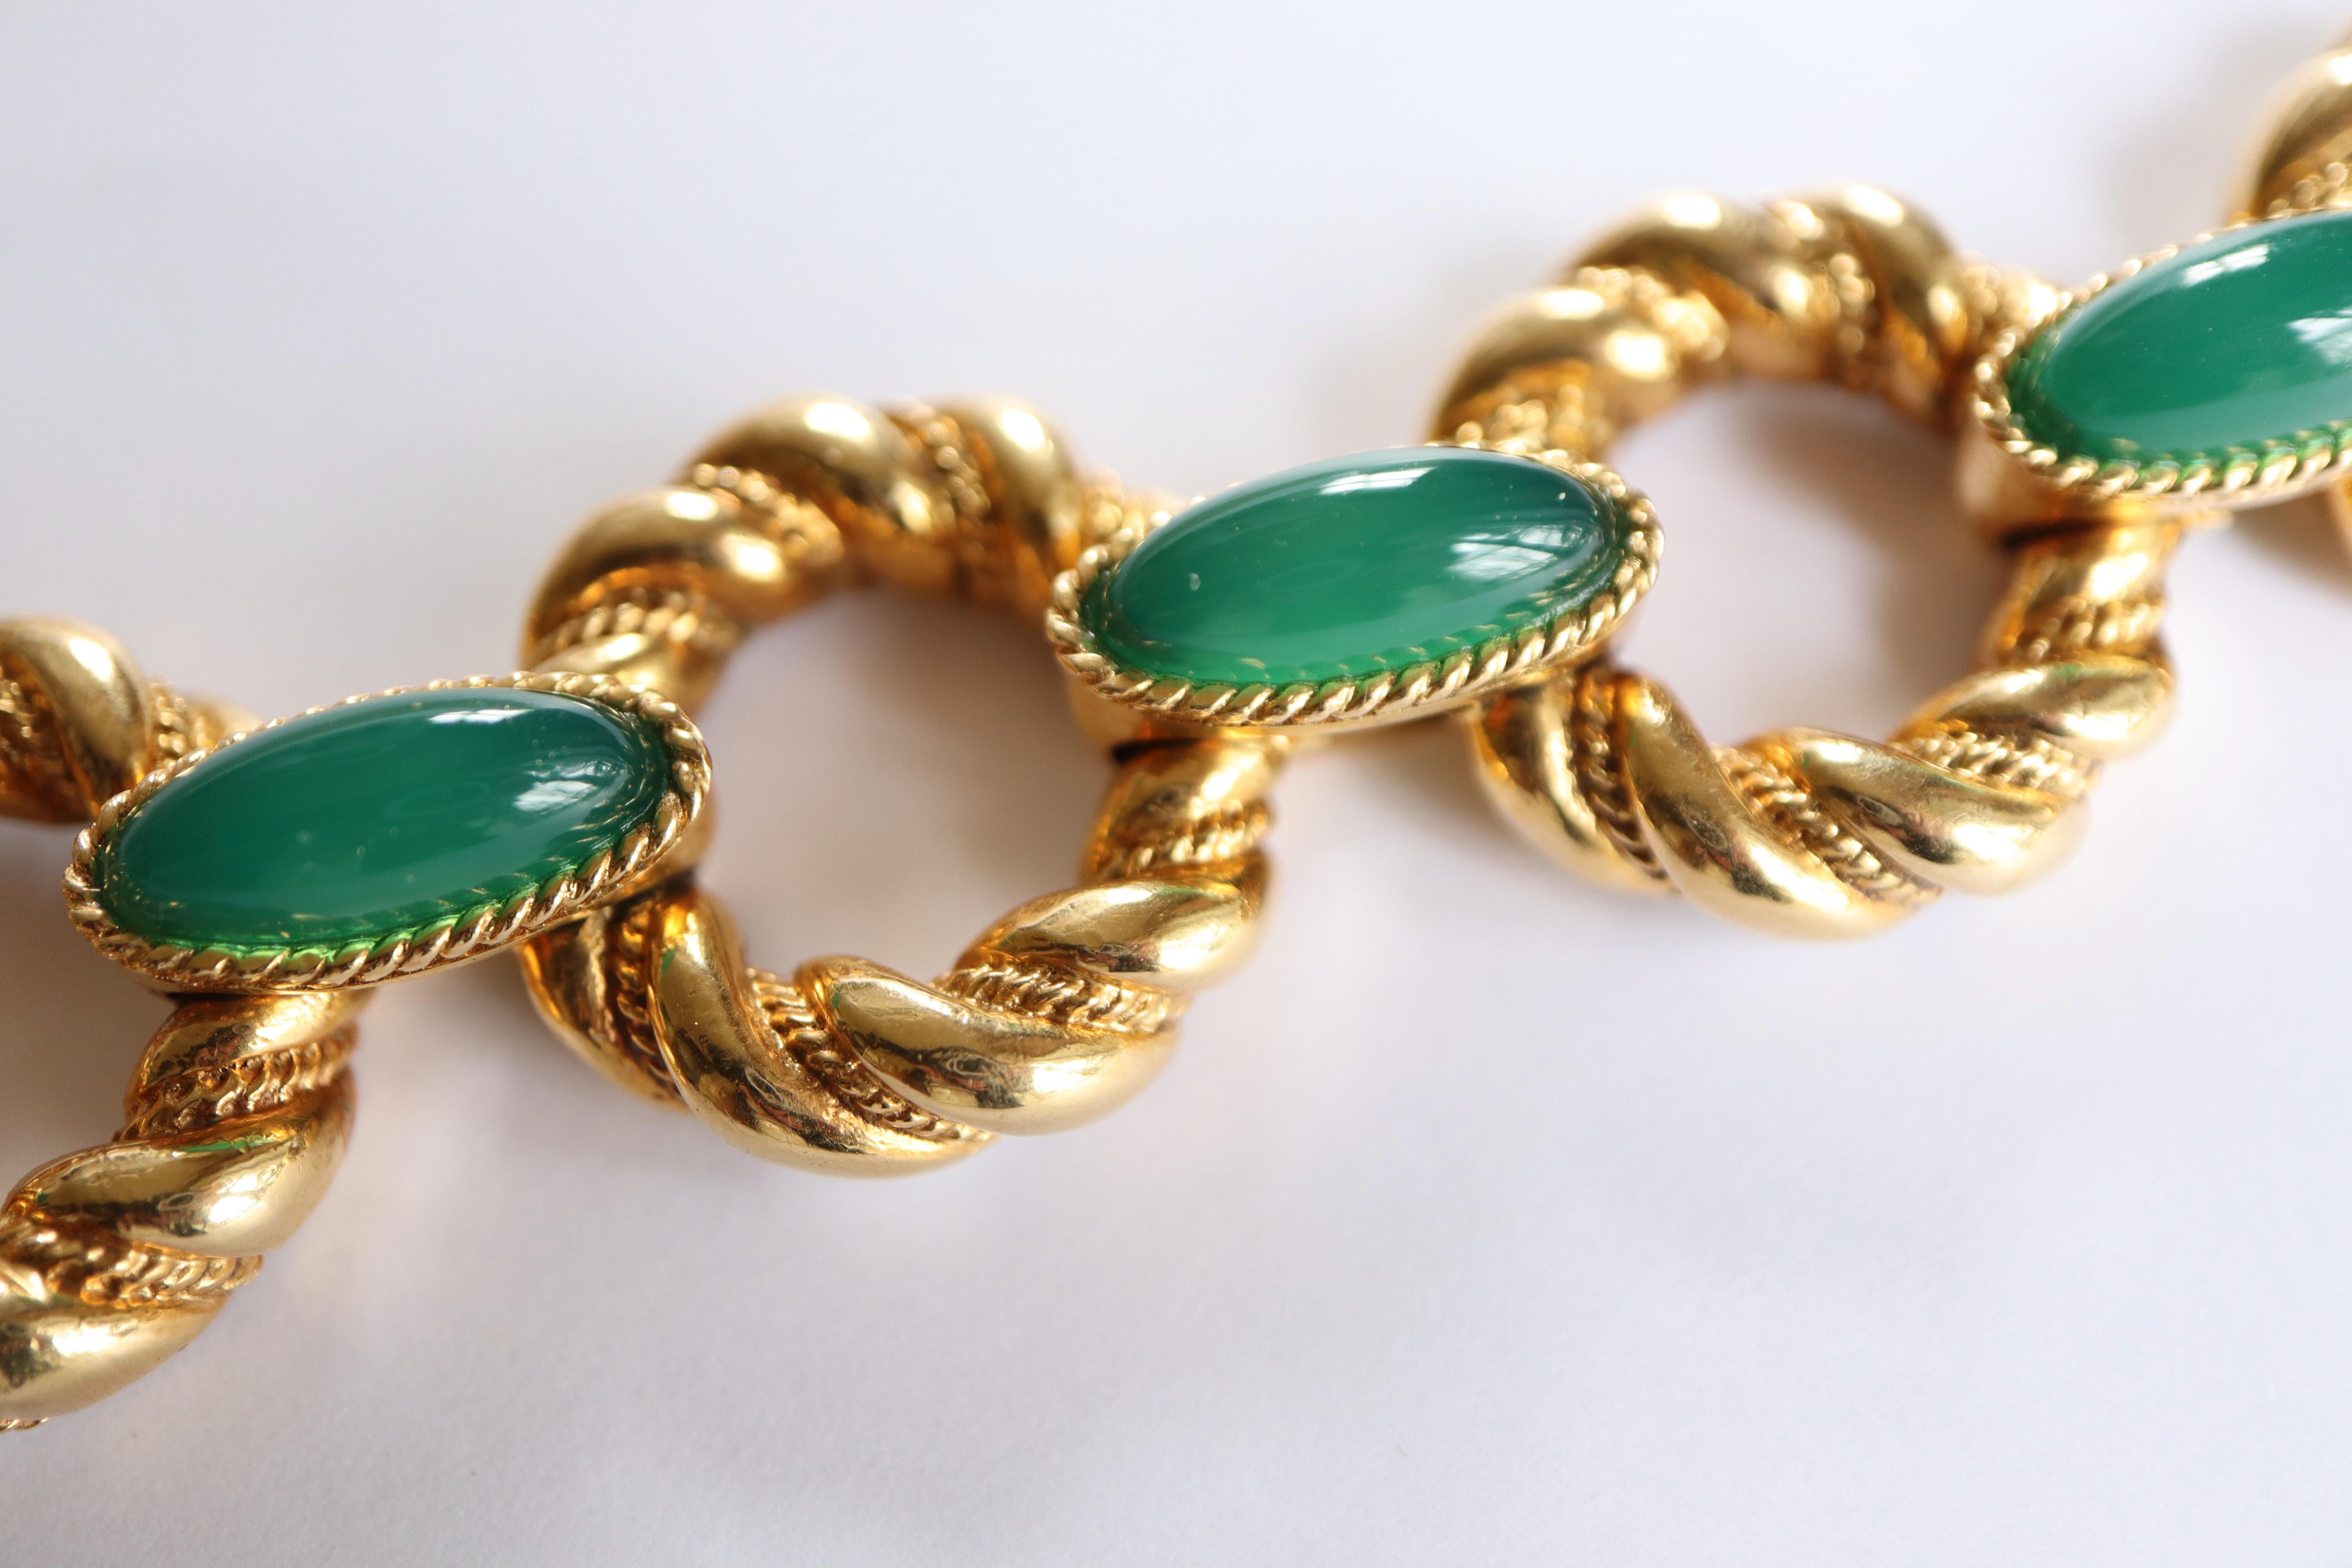 BOUCHERON Vintage bracelet in 18-carat 750/000 yellow gold with large twisted links, connected by oval links set with oval chrysoprase cabochons, braided surround. Work around 1960. 
The bracelet is Signed Boucheron Paris and is numbered. 
Eagle's